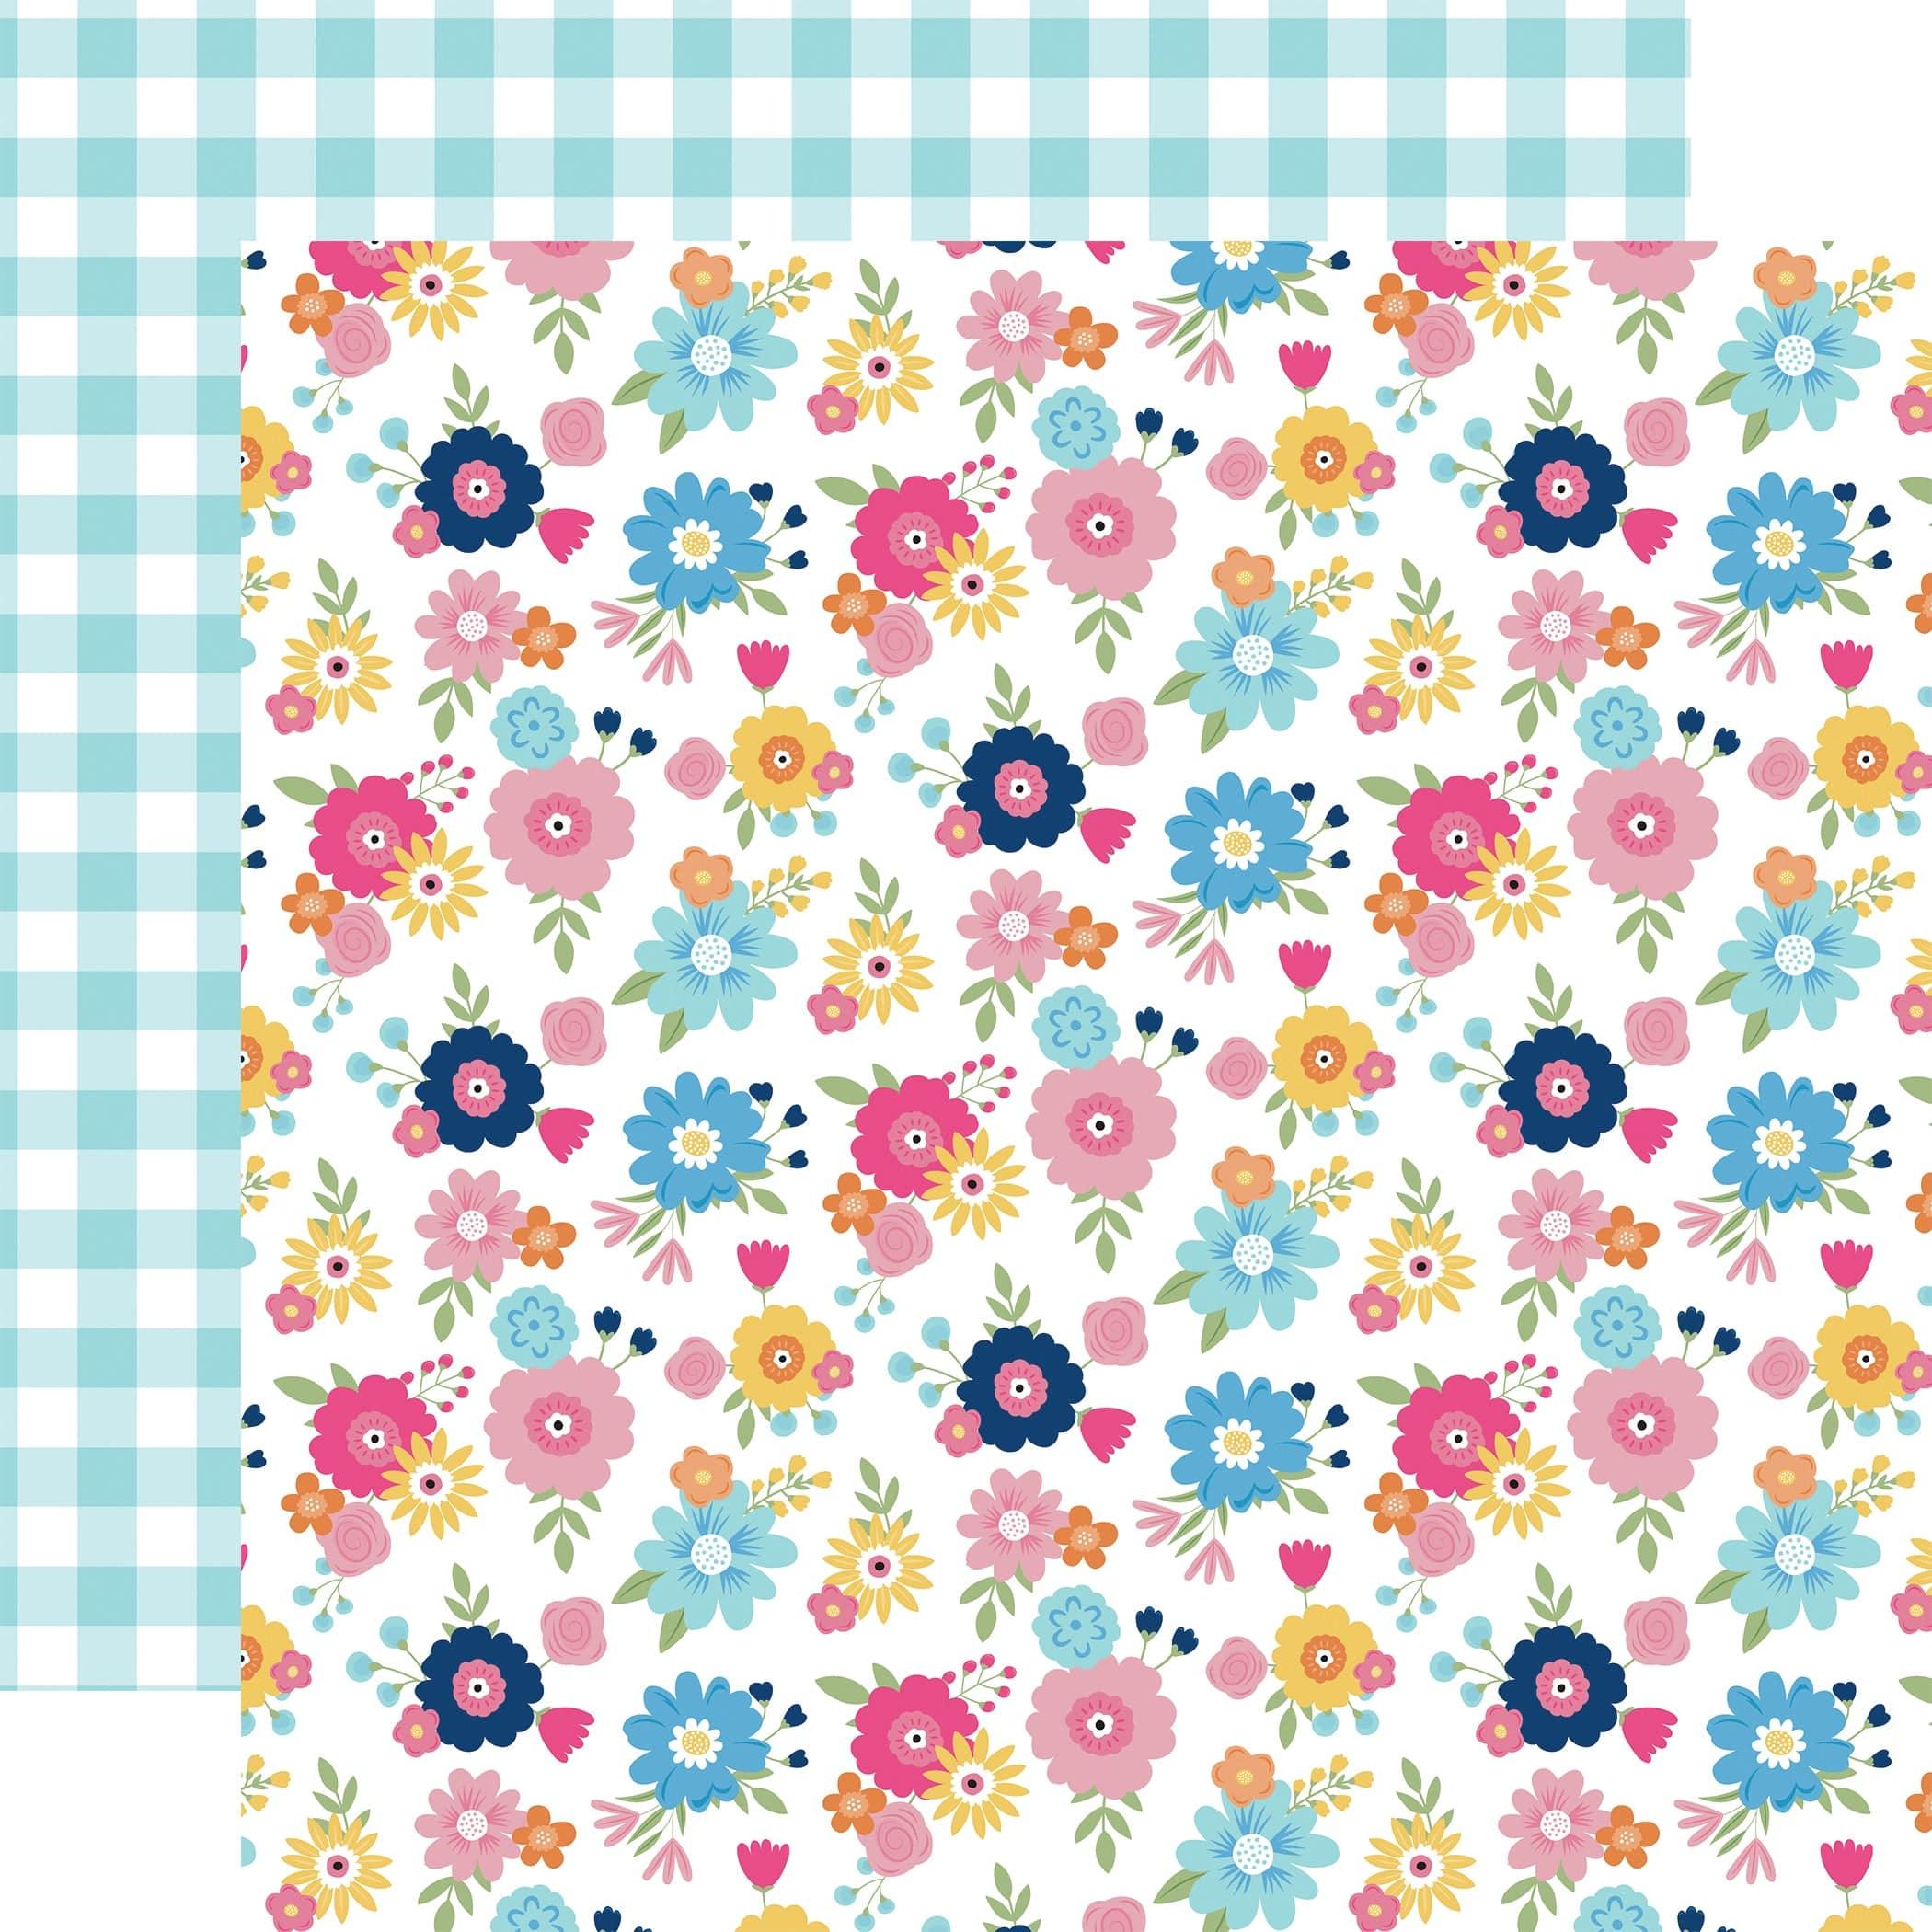 Play All Day Girl Collection Best Friend Floral 12 x 12 Double-Sided Scrapbook Paper by Echo Park Paper - Scrapbook Supply Companies